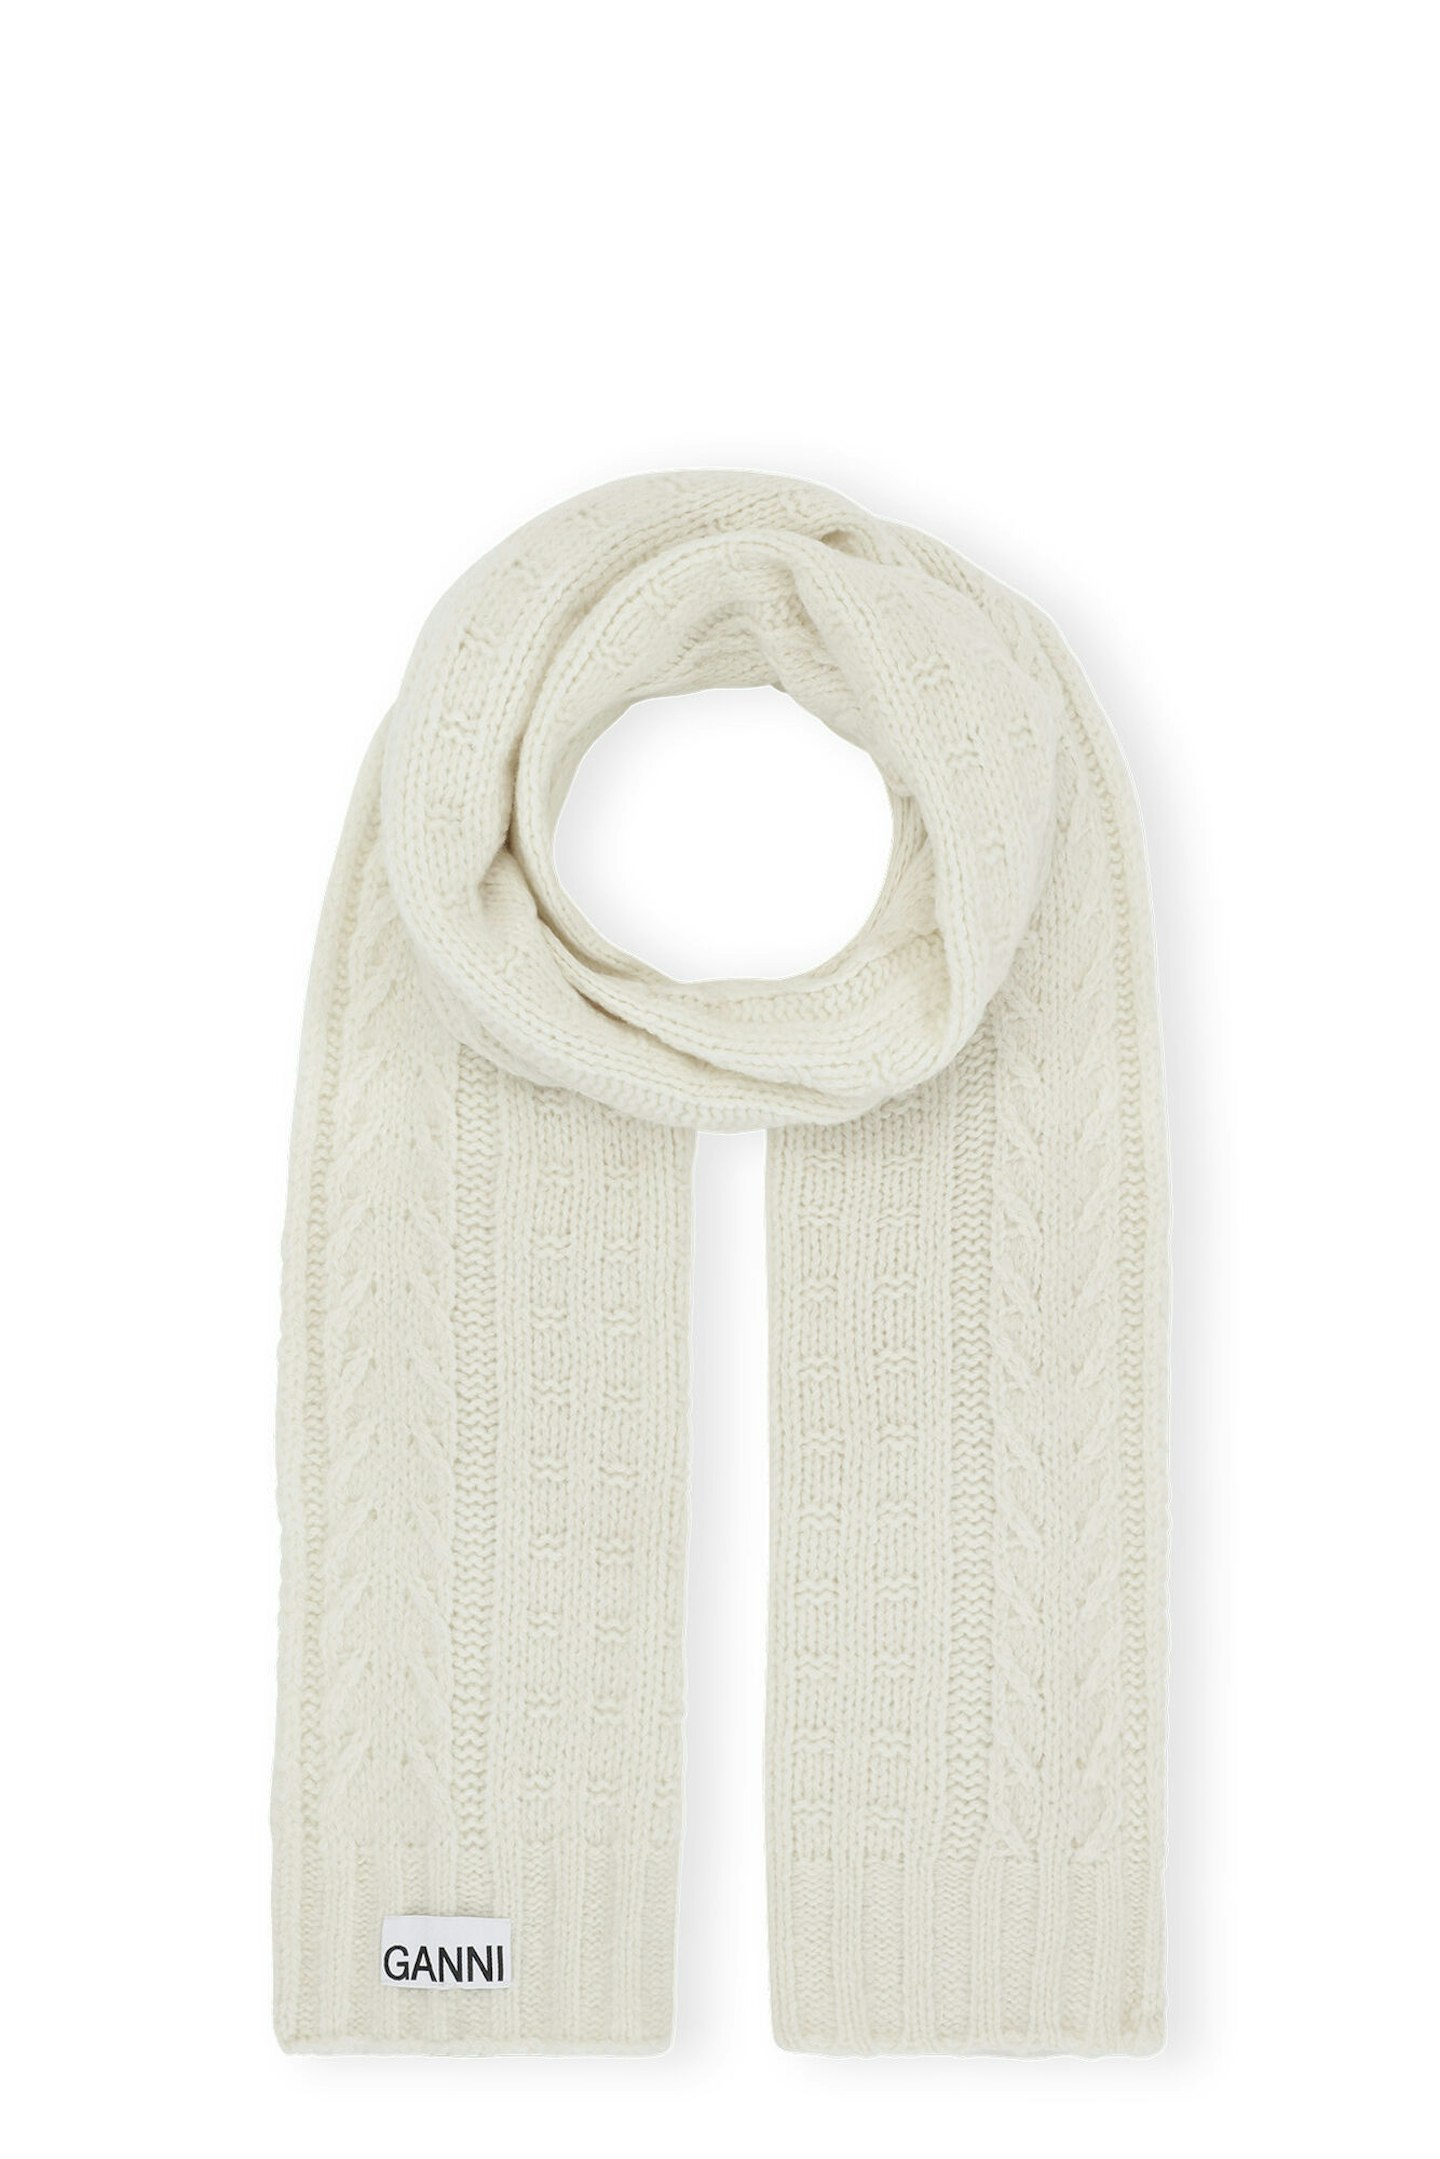 Ganni, White Cable Scarf